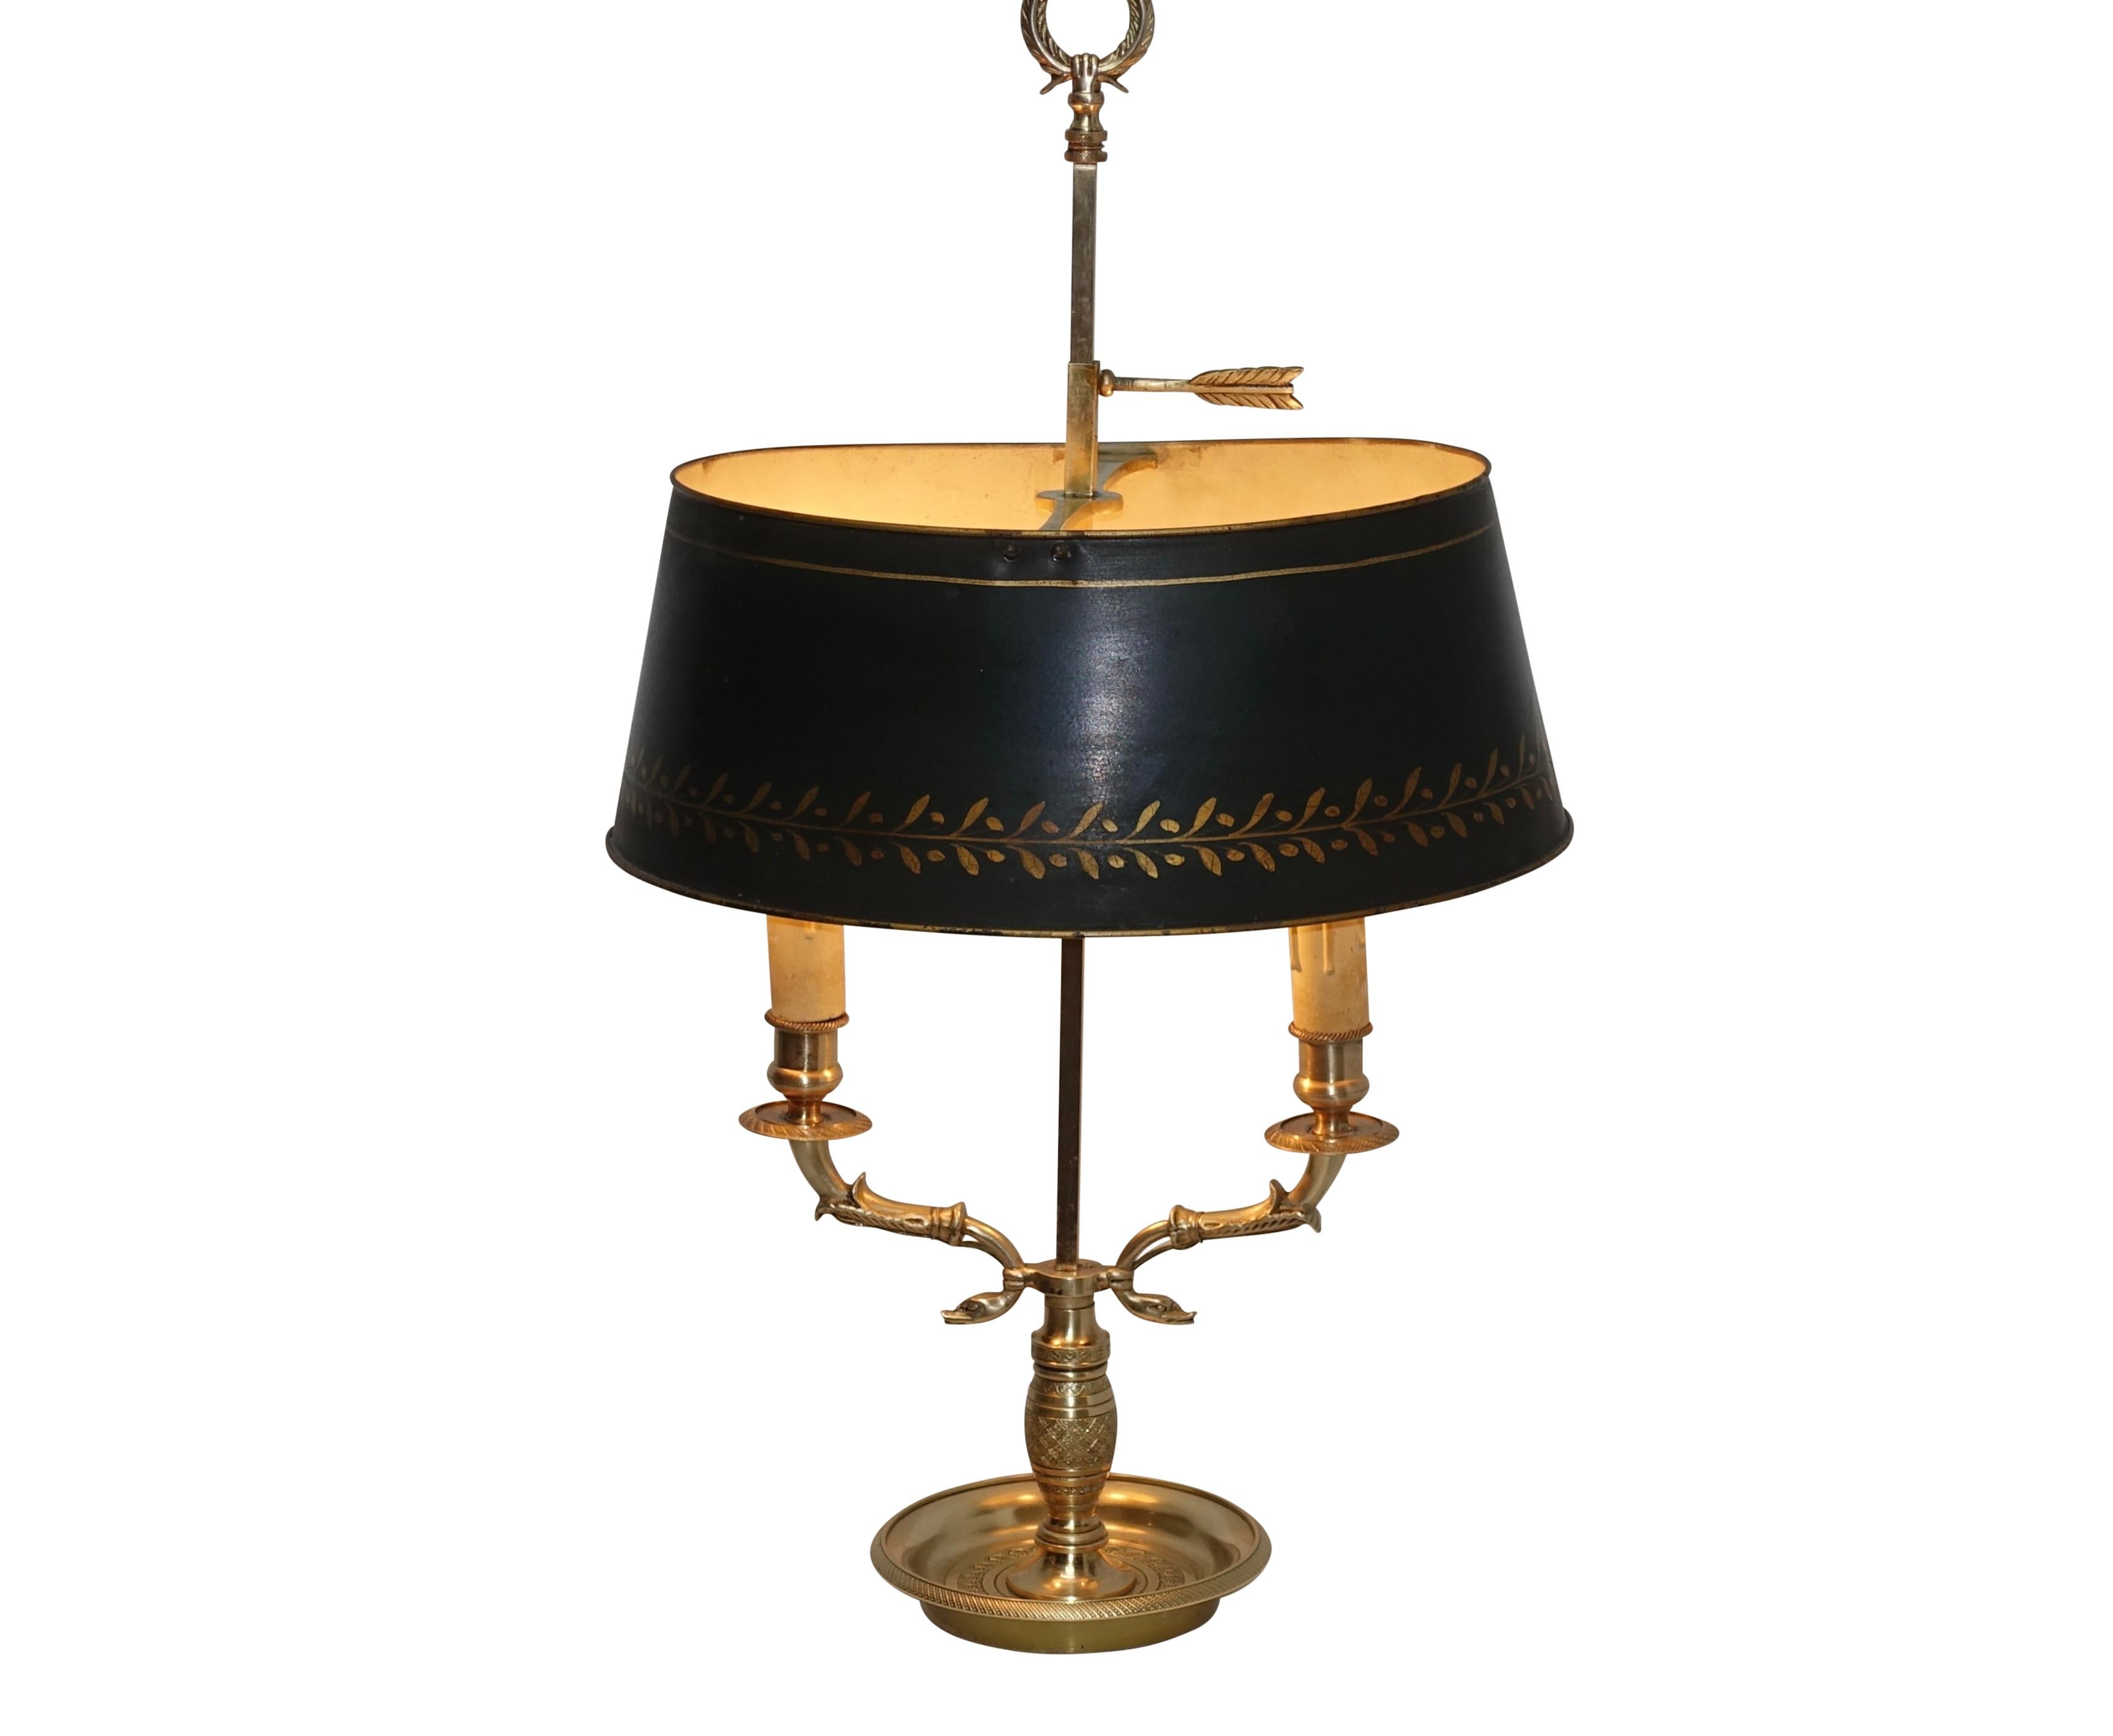 Brass two-light swan neck bouillotte lamp with oval shape black painted and gilt accented tole shade. Converted to electric in the early 20th century, France, mid-19th century.